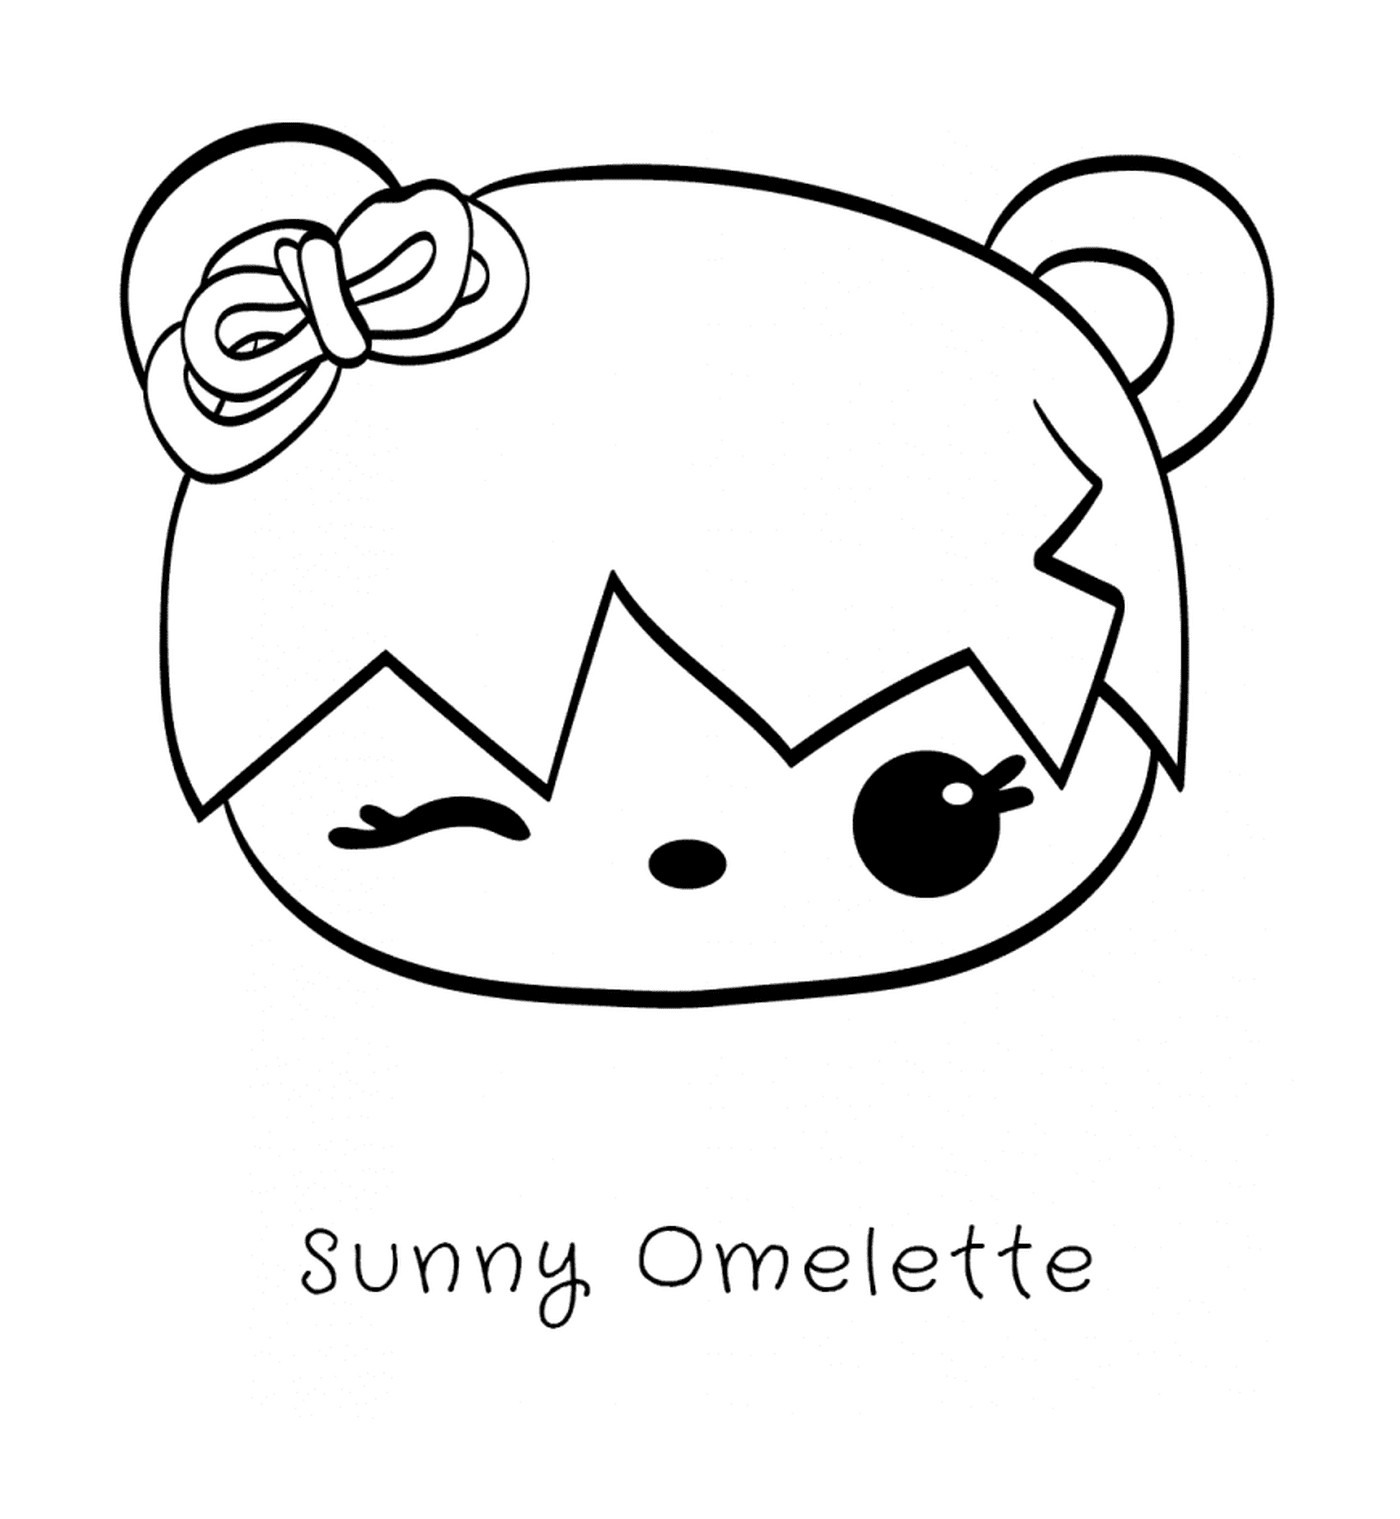  Happy sunny omelette 